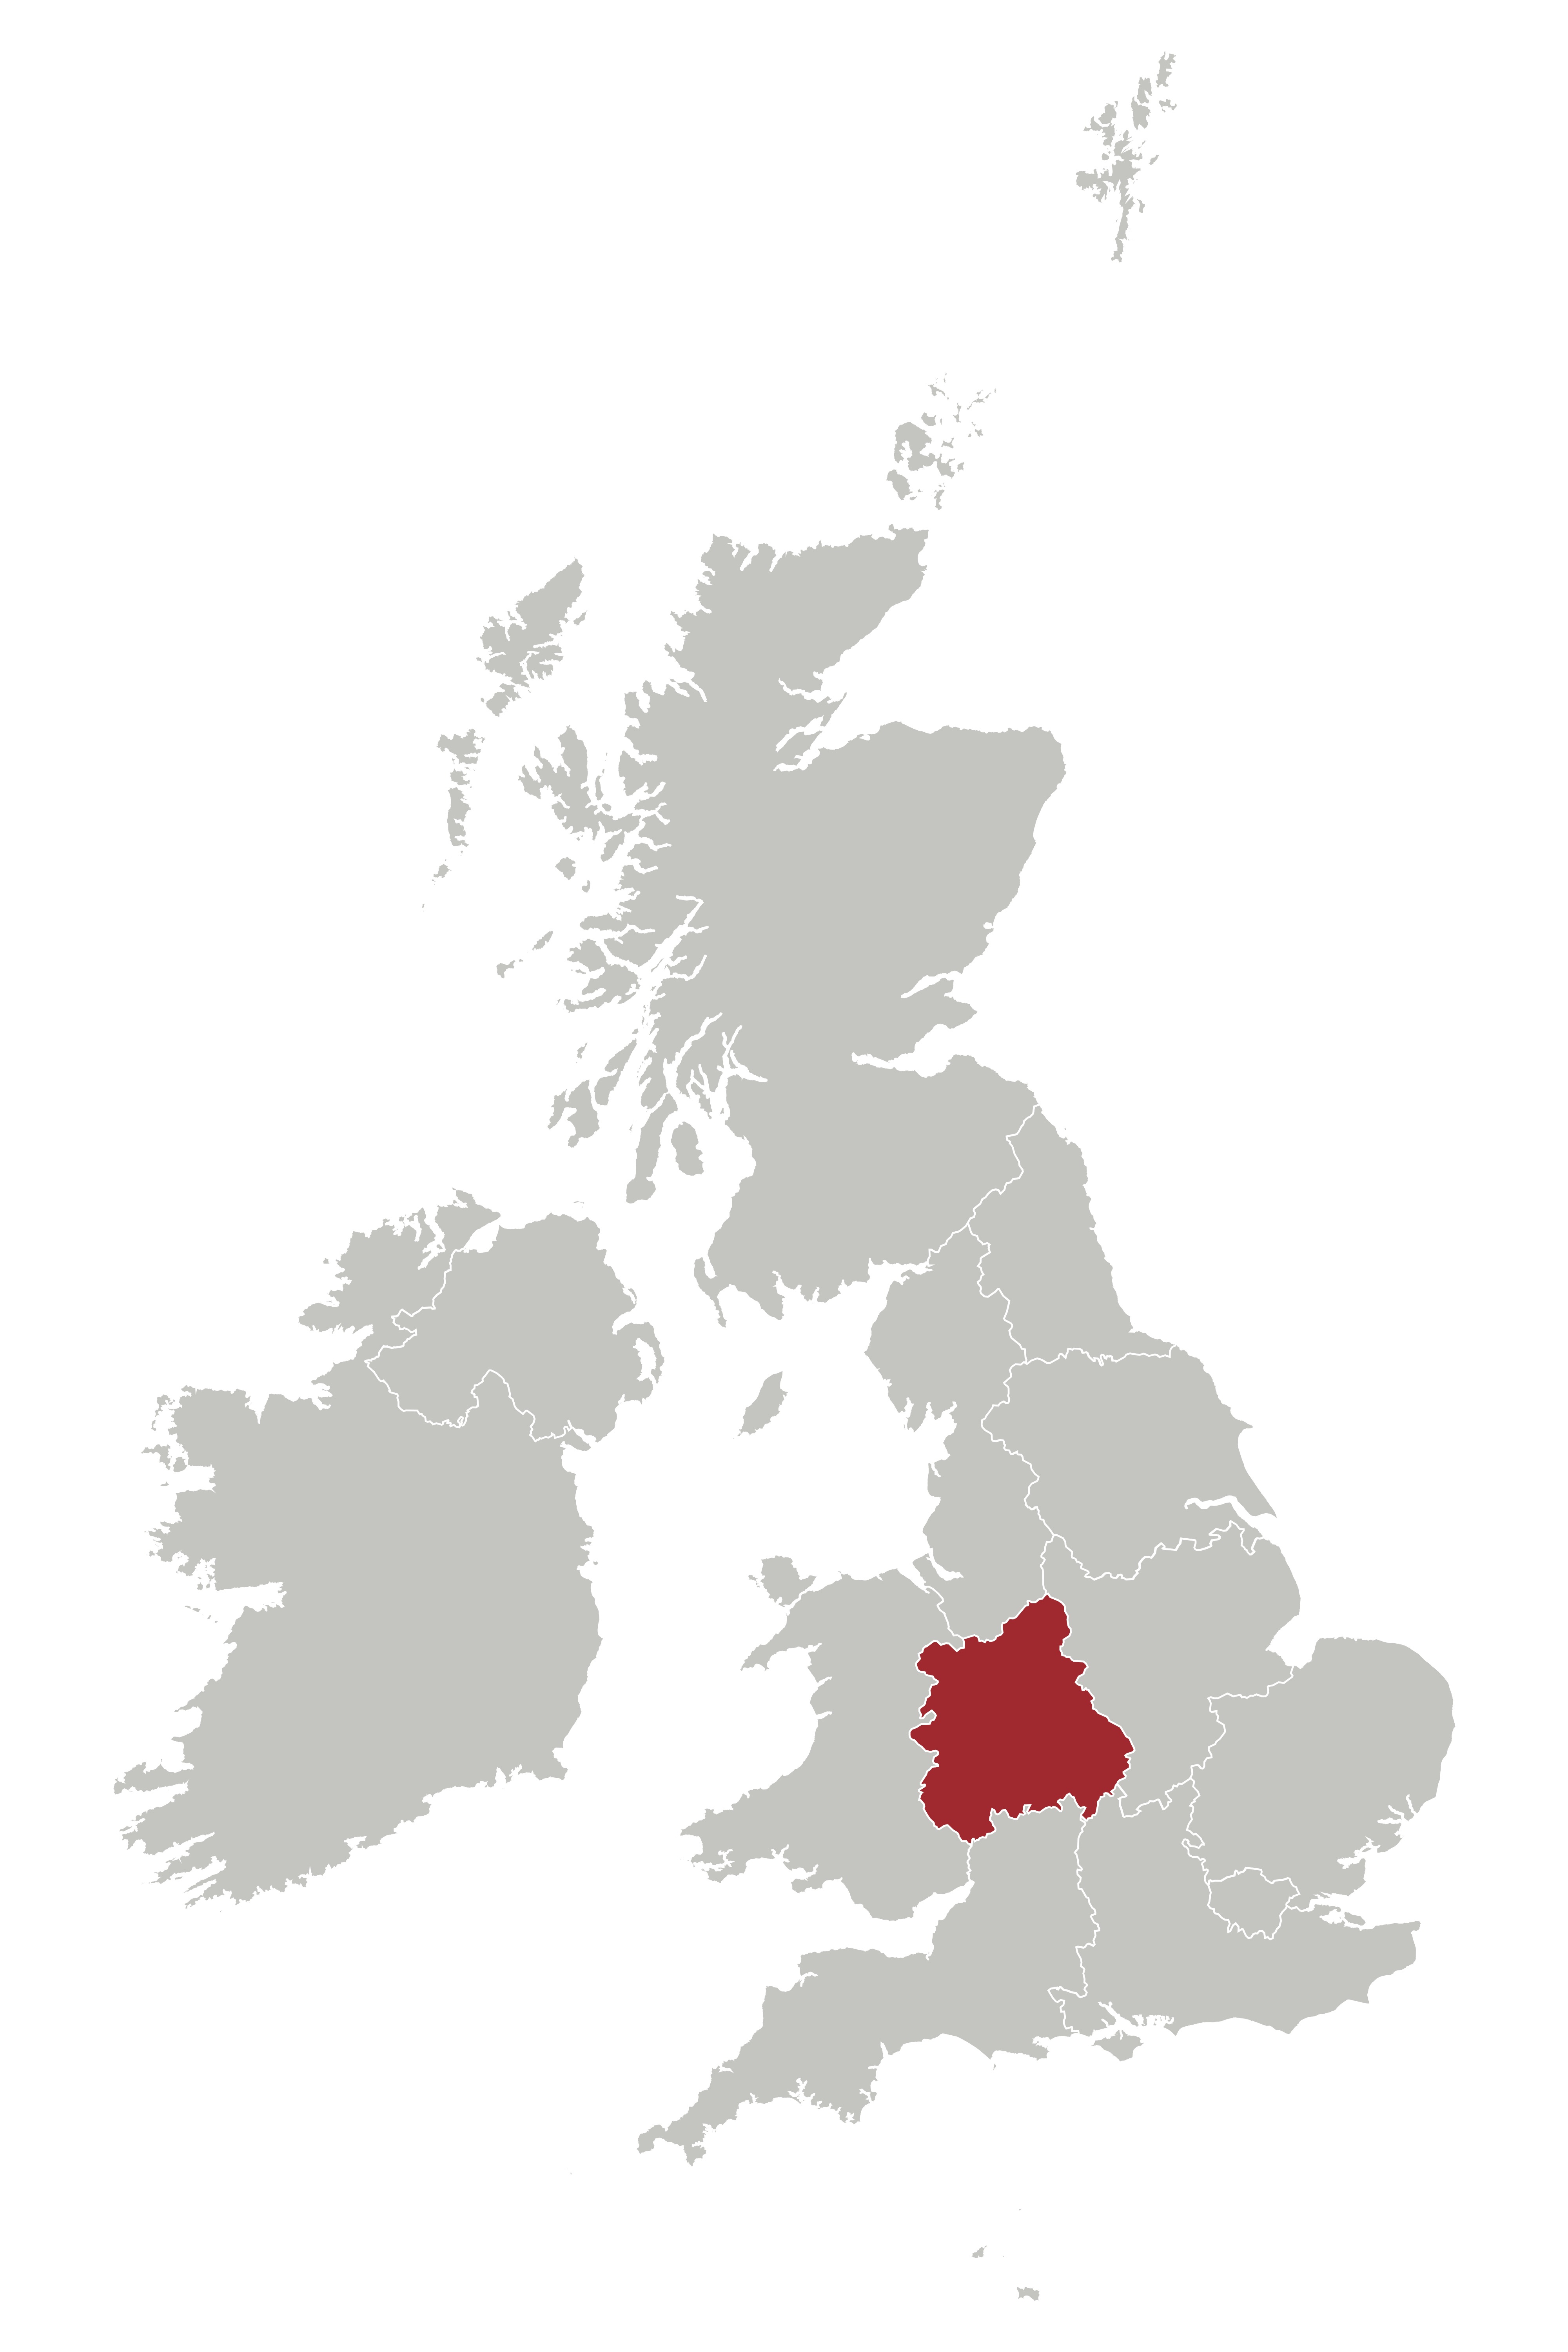 Map of UK and Ireland with The West Midlands region highlighted.